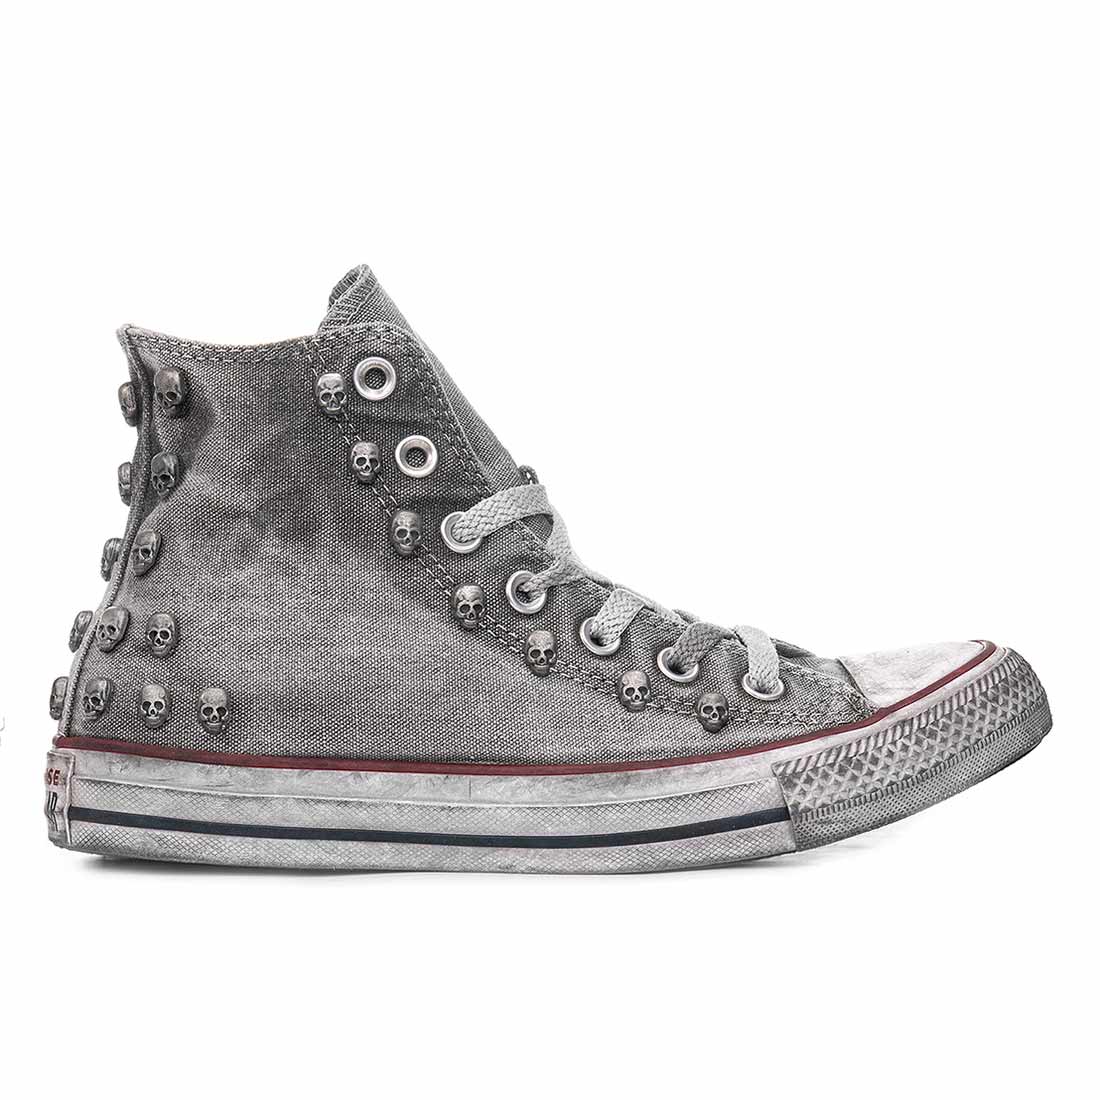 Converse All Star Limited Edition con Teschi | Sped. – Racoon Lab